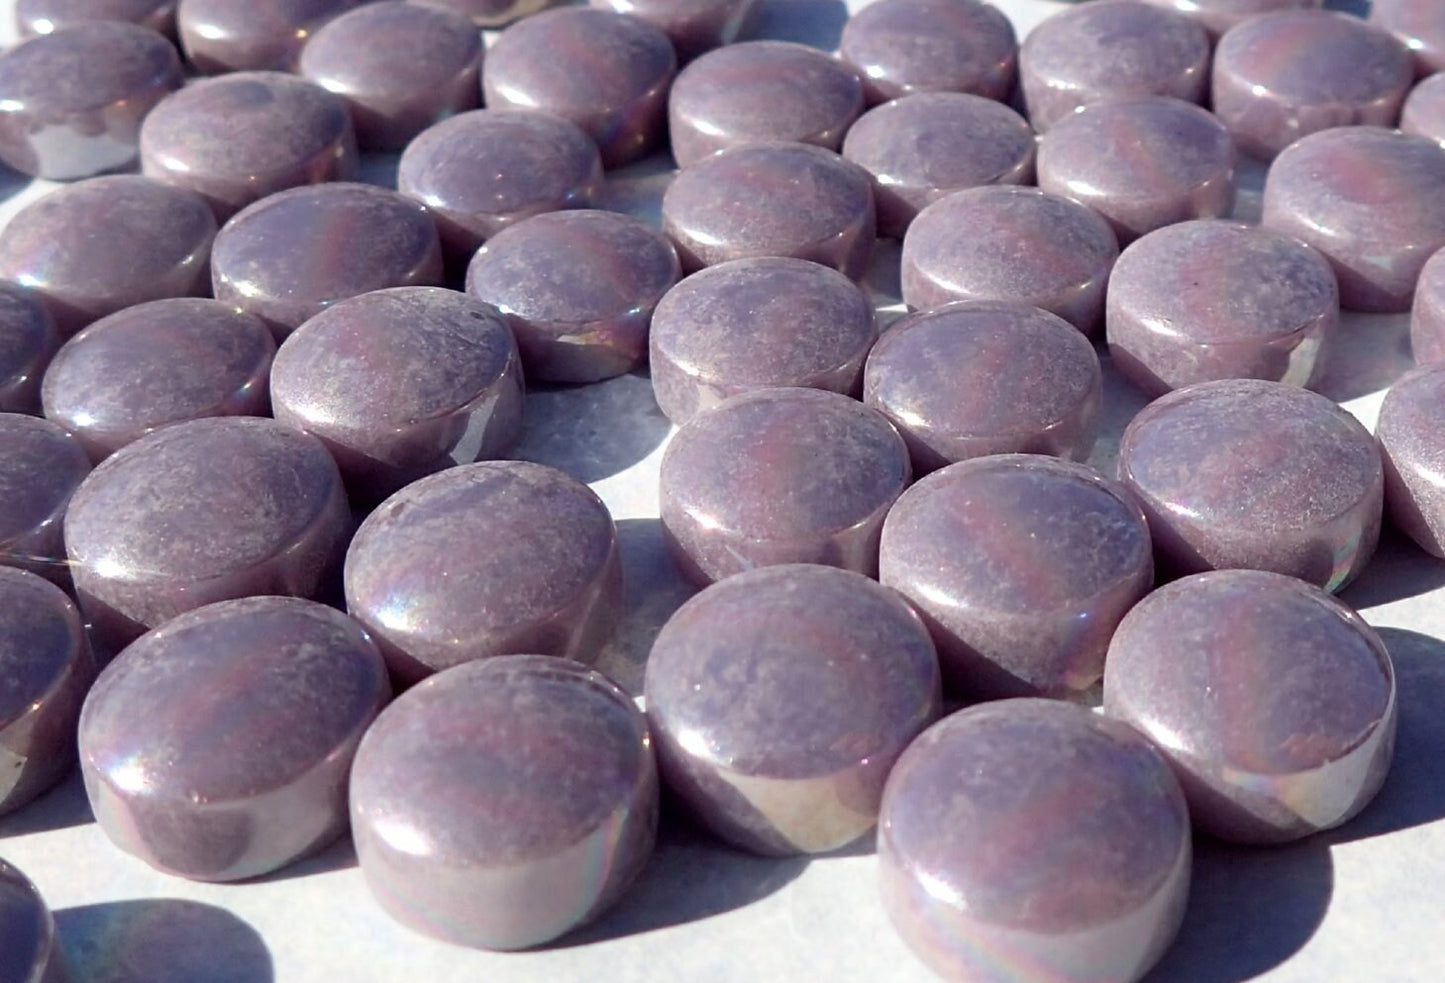 Lavender Iridescent Glass Drops Mosaic Tiles - 100 grams Pearl 12mm Glass Gems in Light Purple - Over 60 Tiles